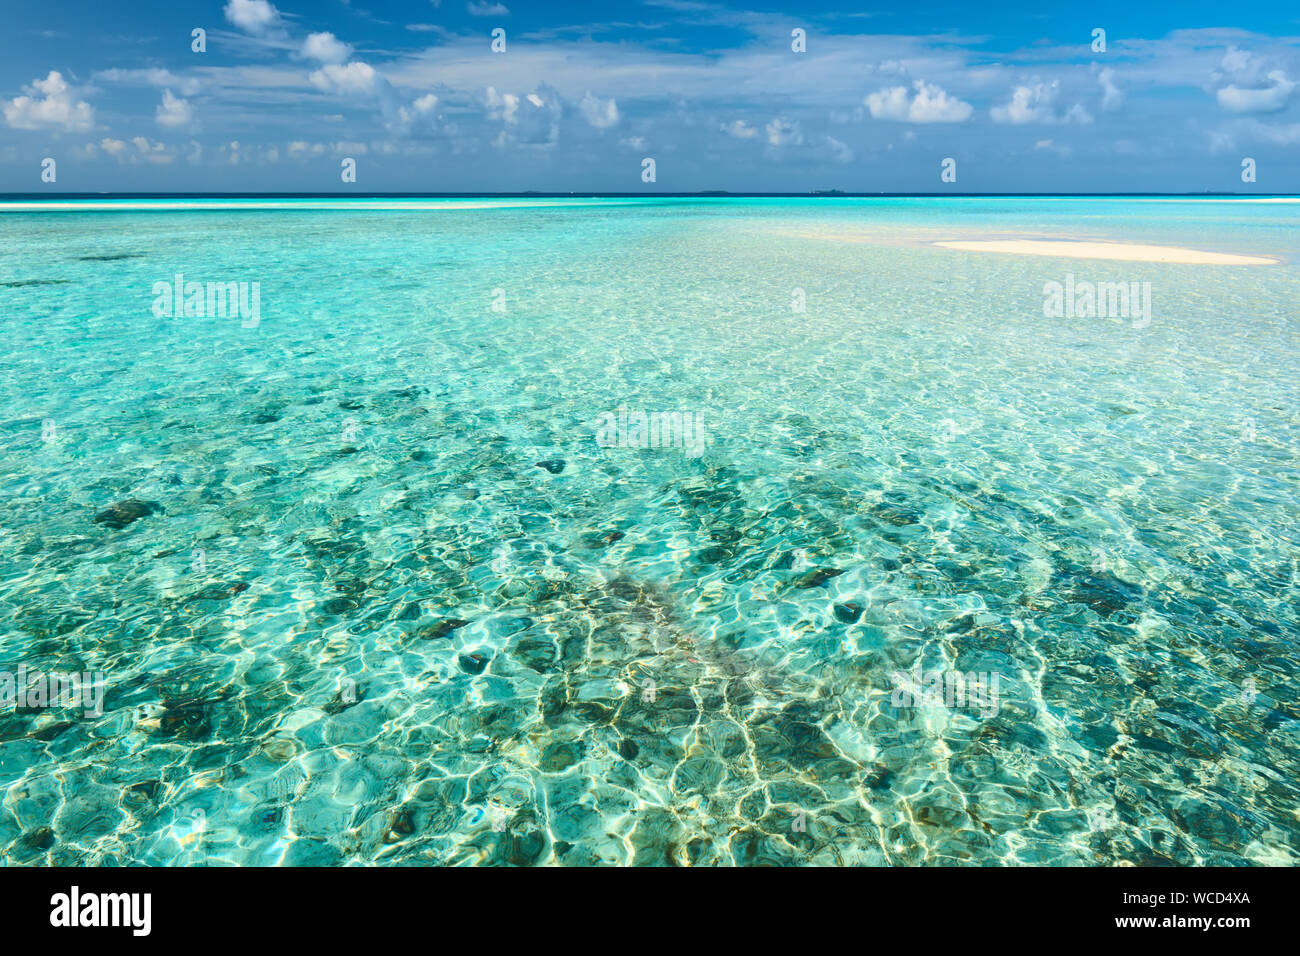 Cloudly Sky with Turquoise Ocean Stock Photo